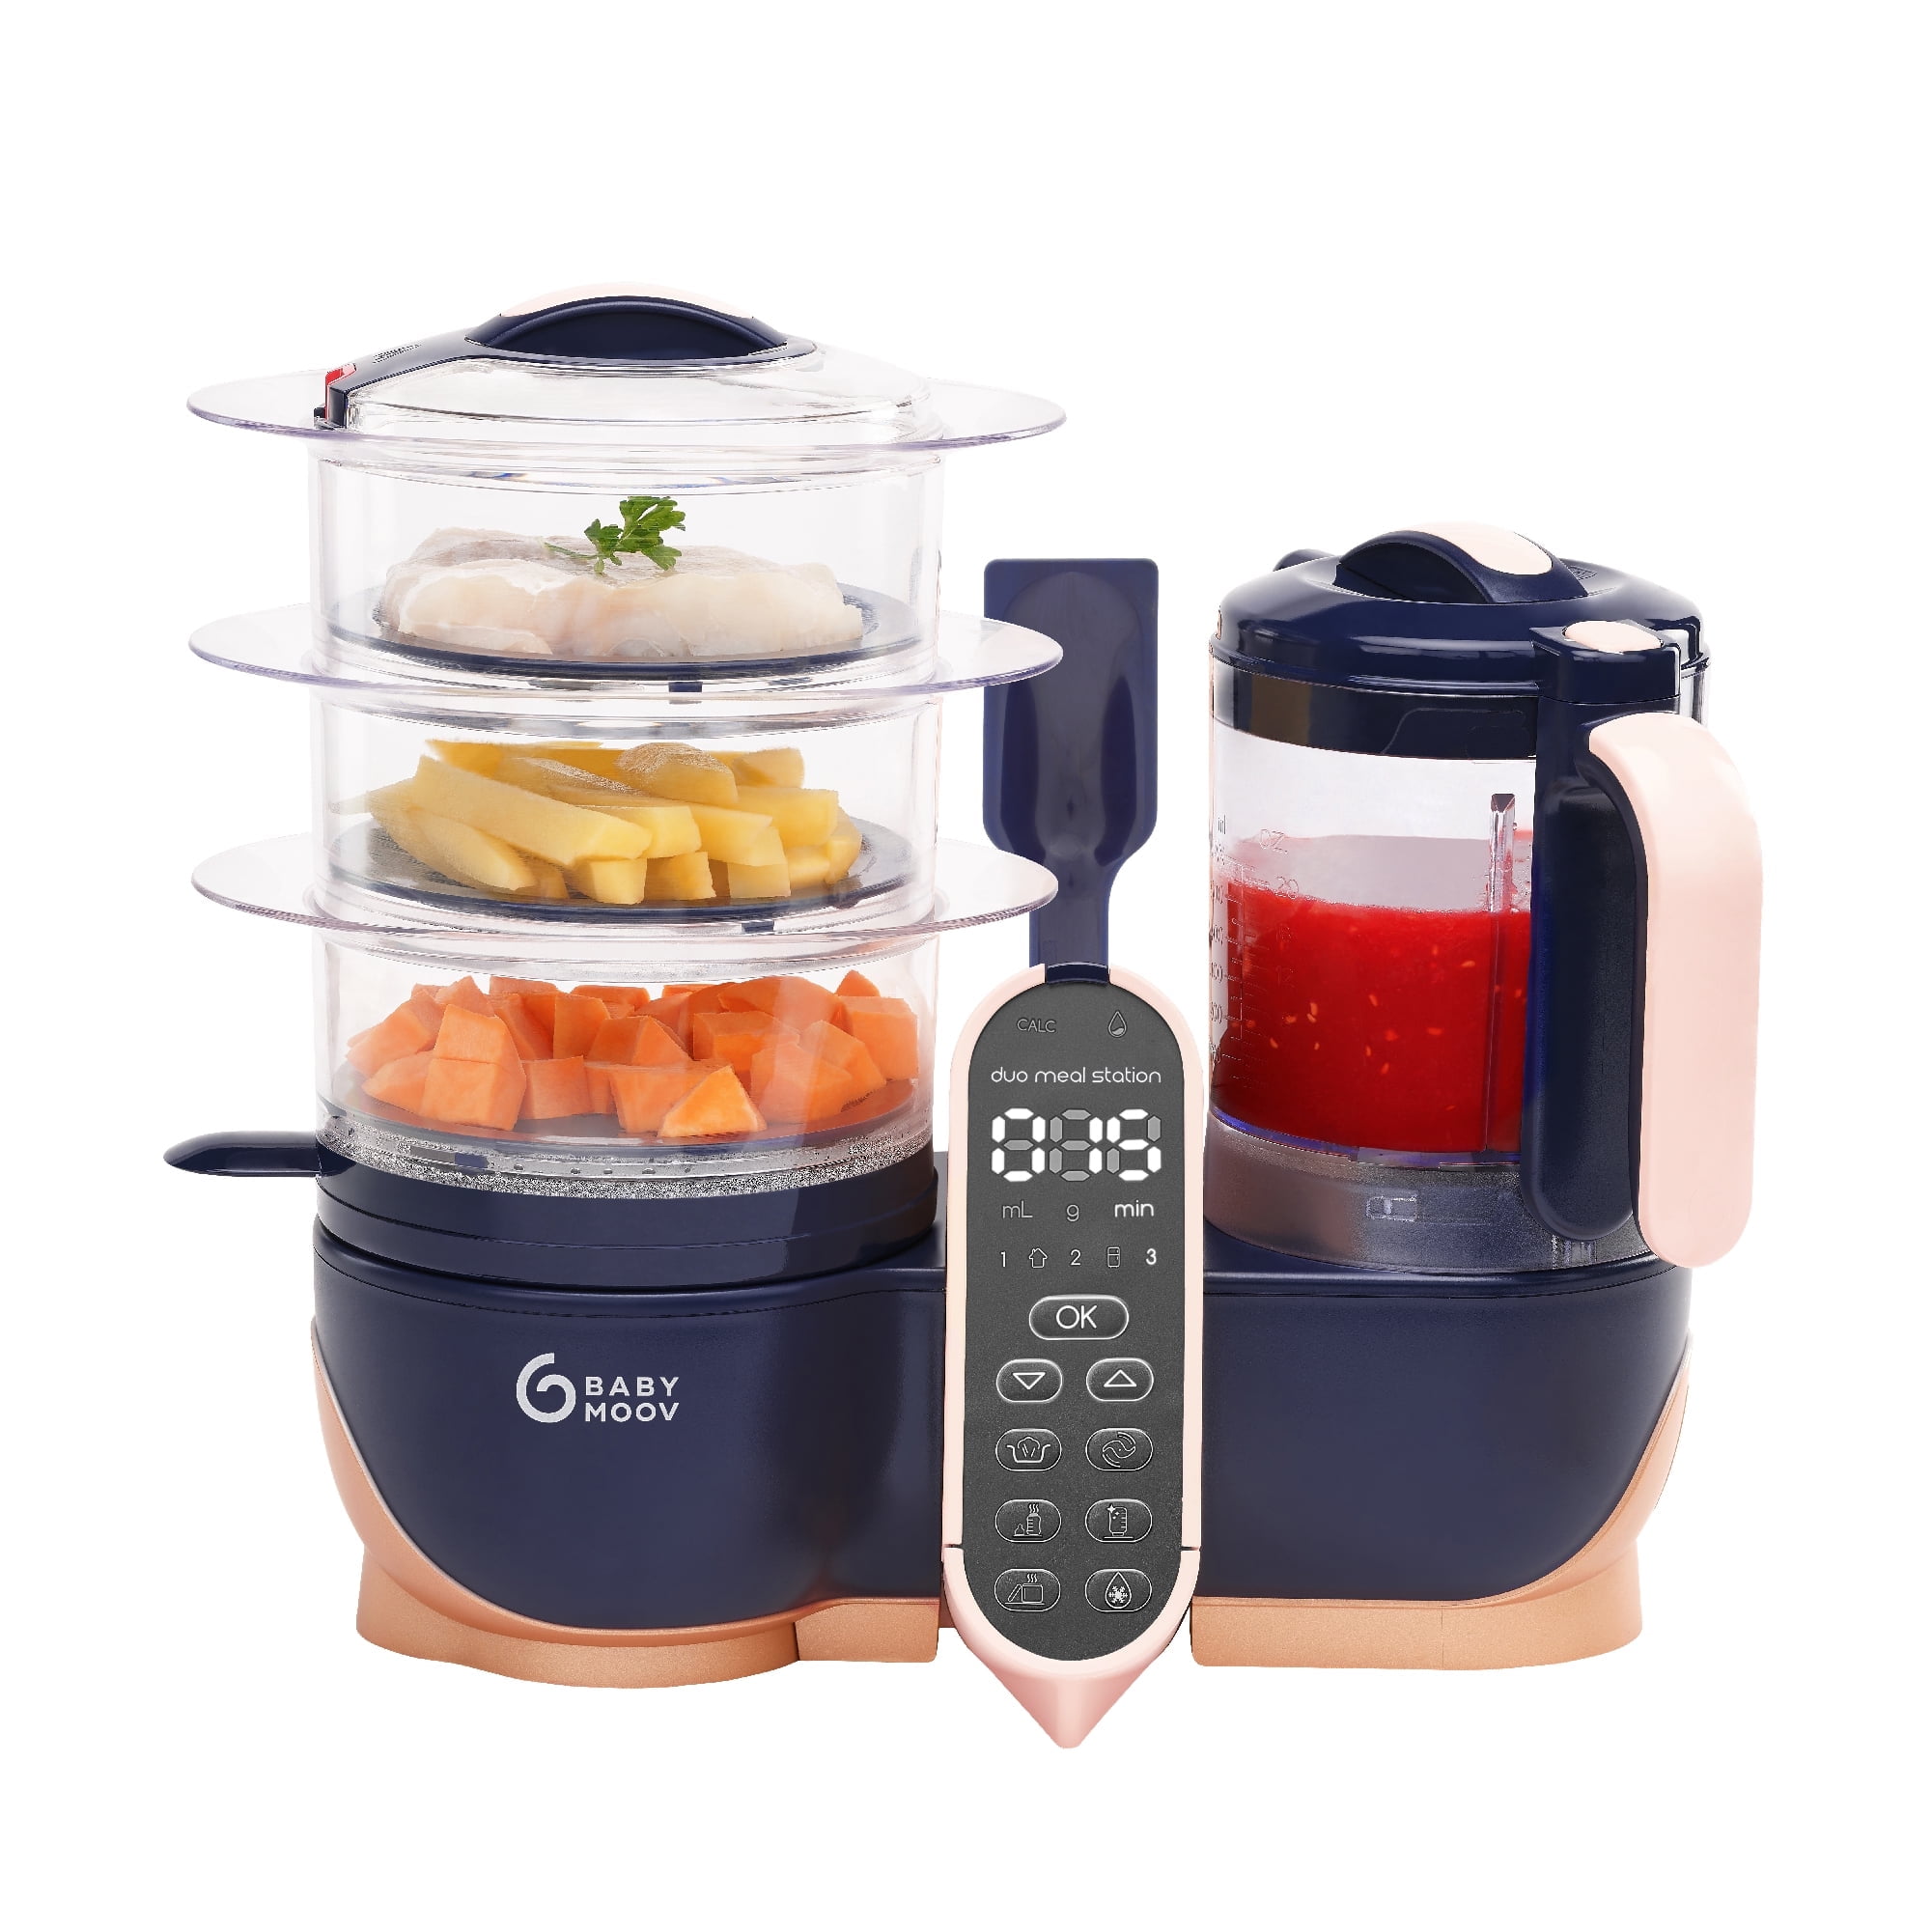 Babymoov Duo Meal Station XL 6-in-1 multi-purpose baby food processor - image 1 of 4